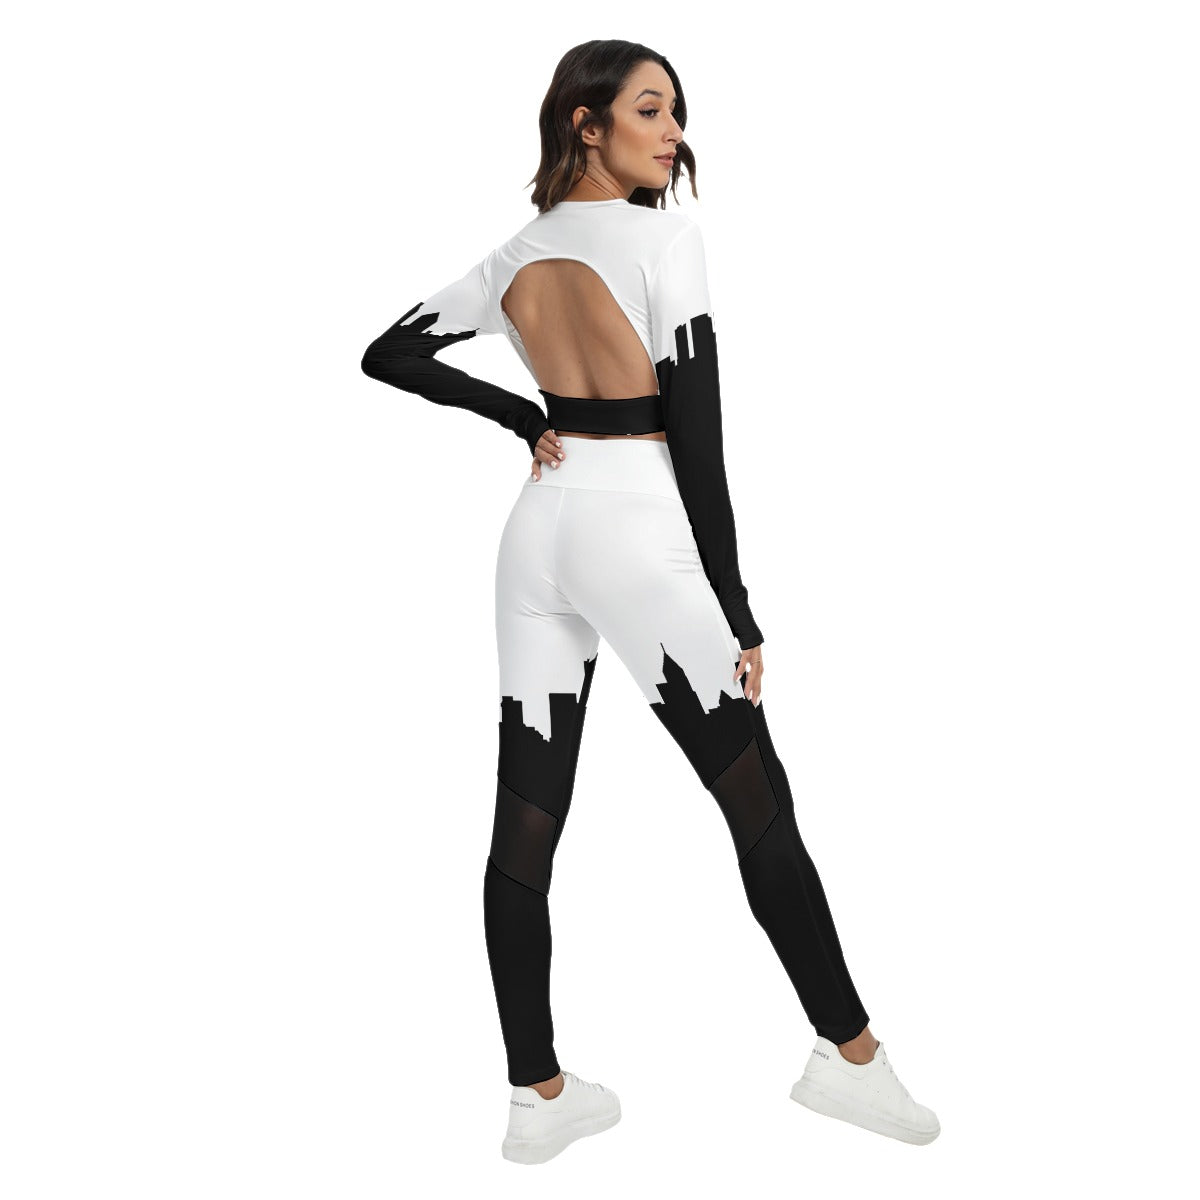 Officially Sexy White & Black Skyline Women's Sport Set With Backless Top And Leggings